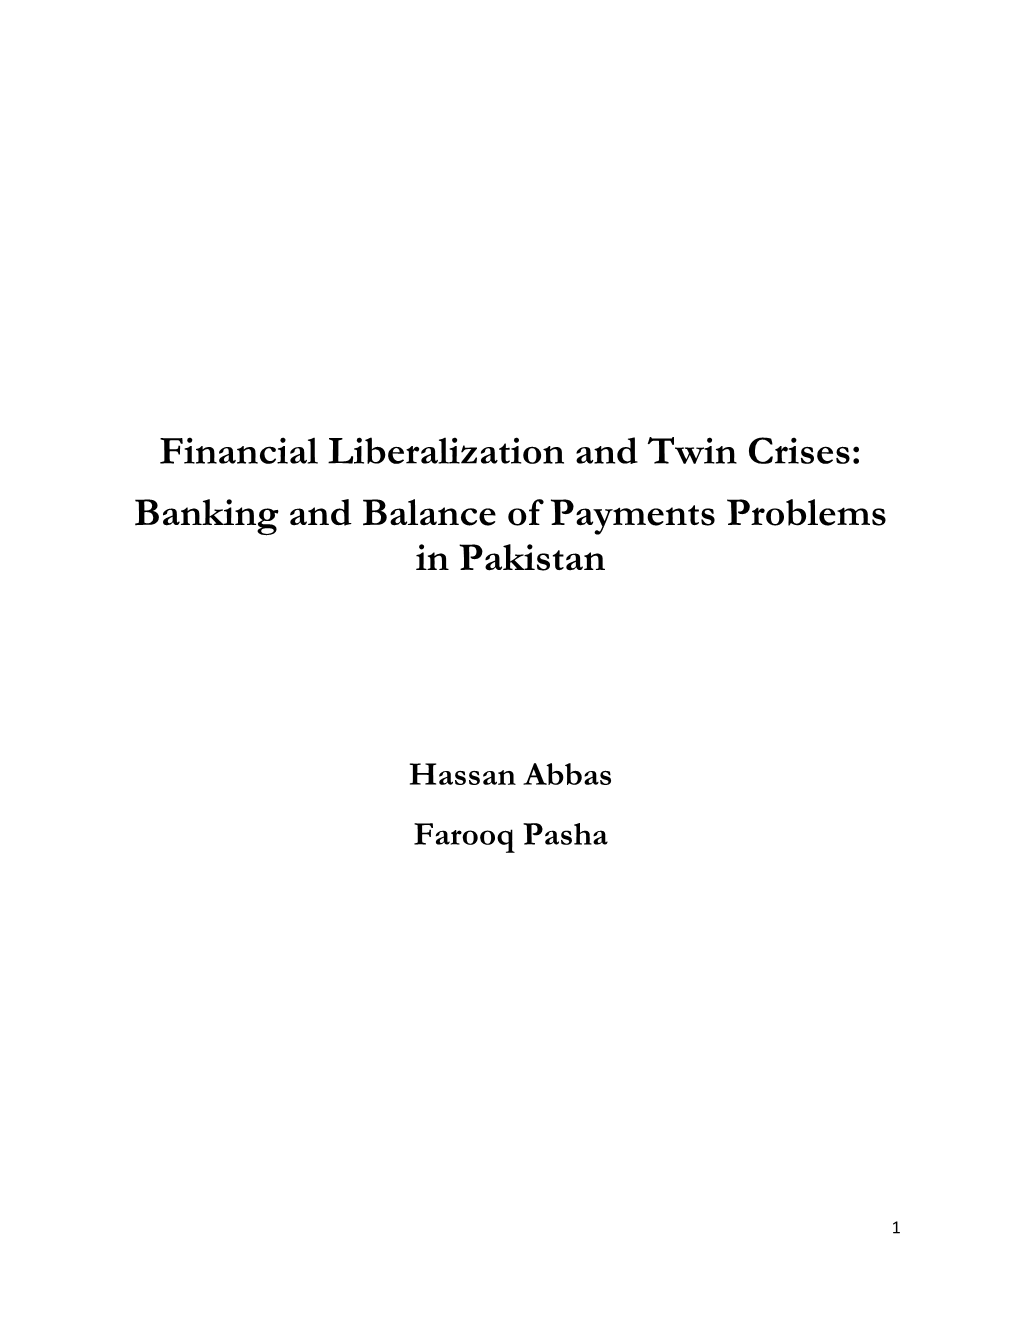 Financial Liberalization and Twin Crises: Banking and Balance of Payments Problems in Pakistan